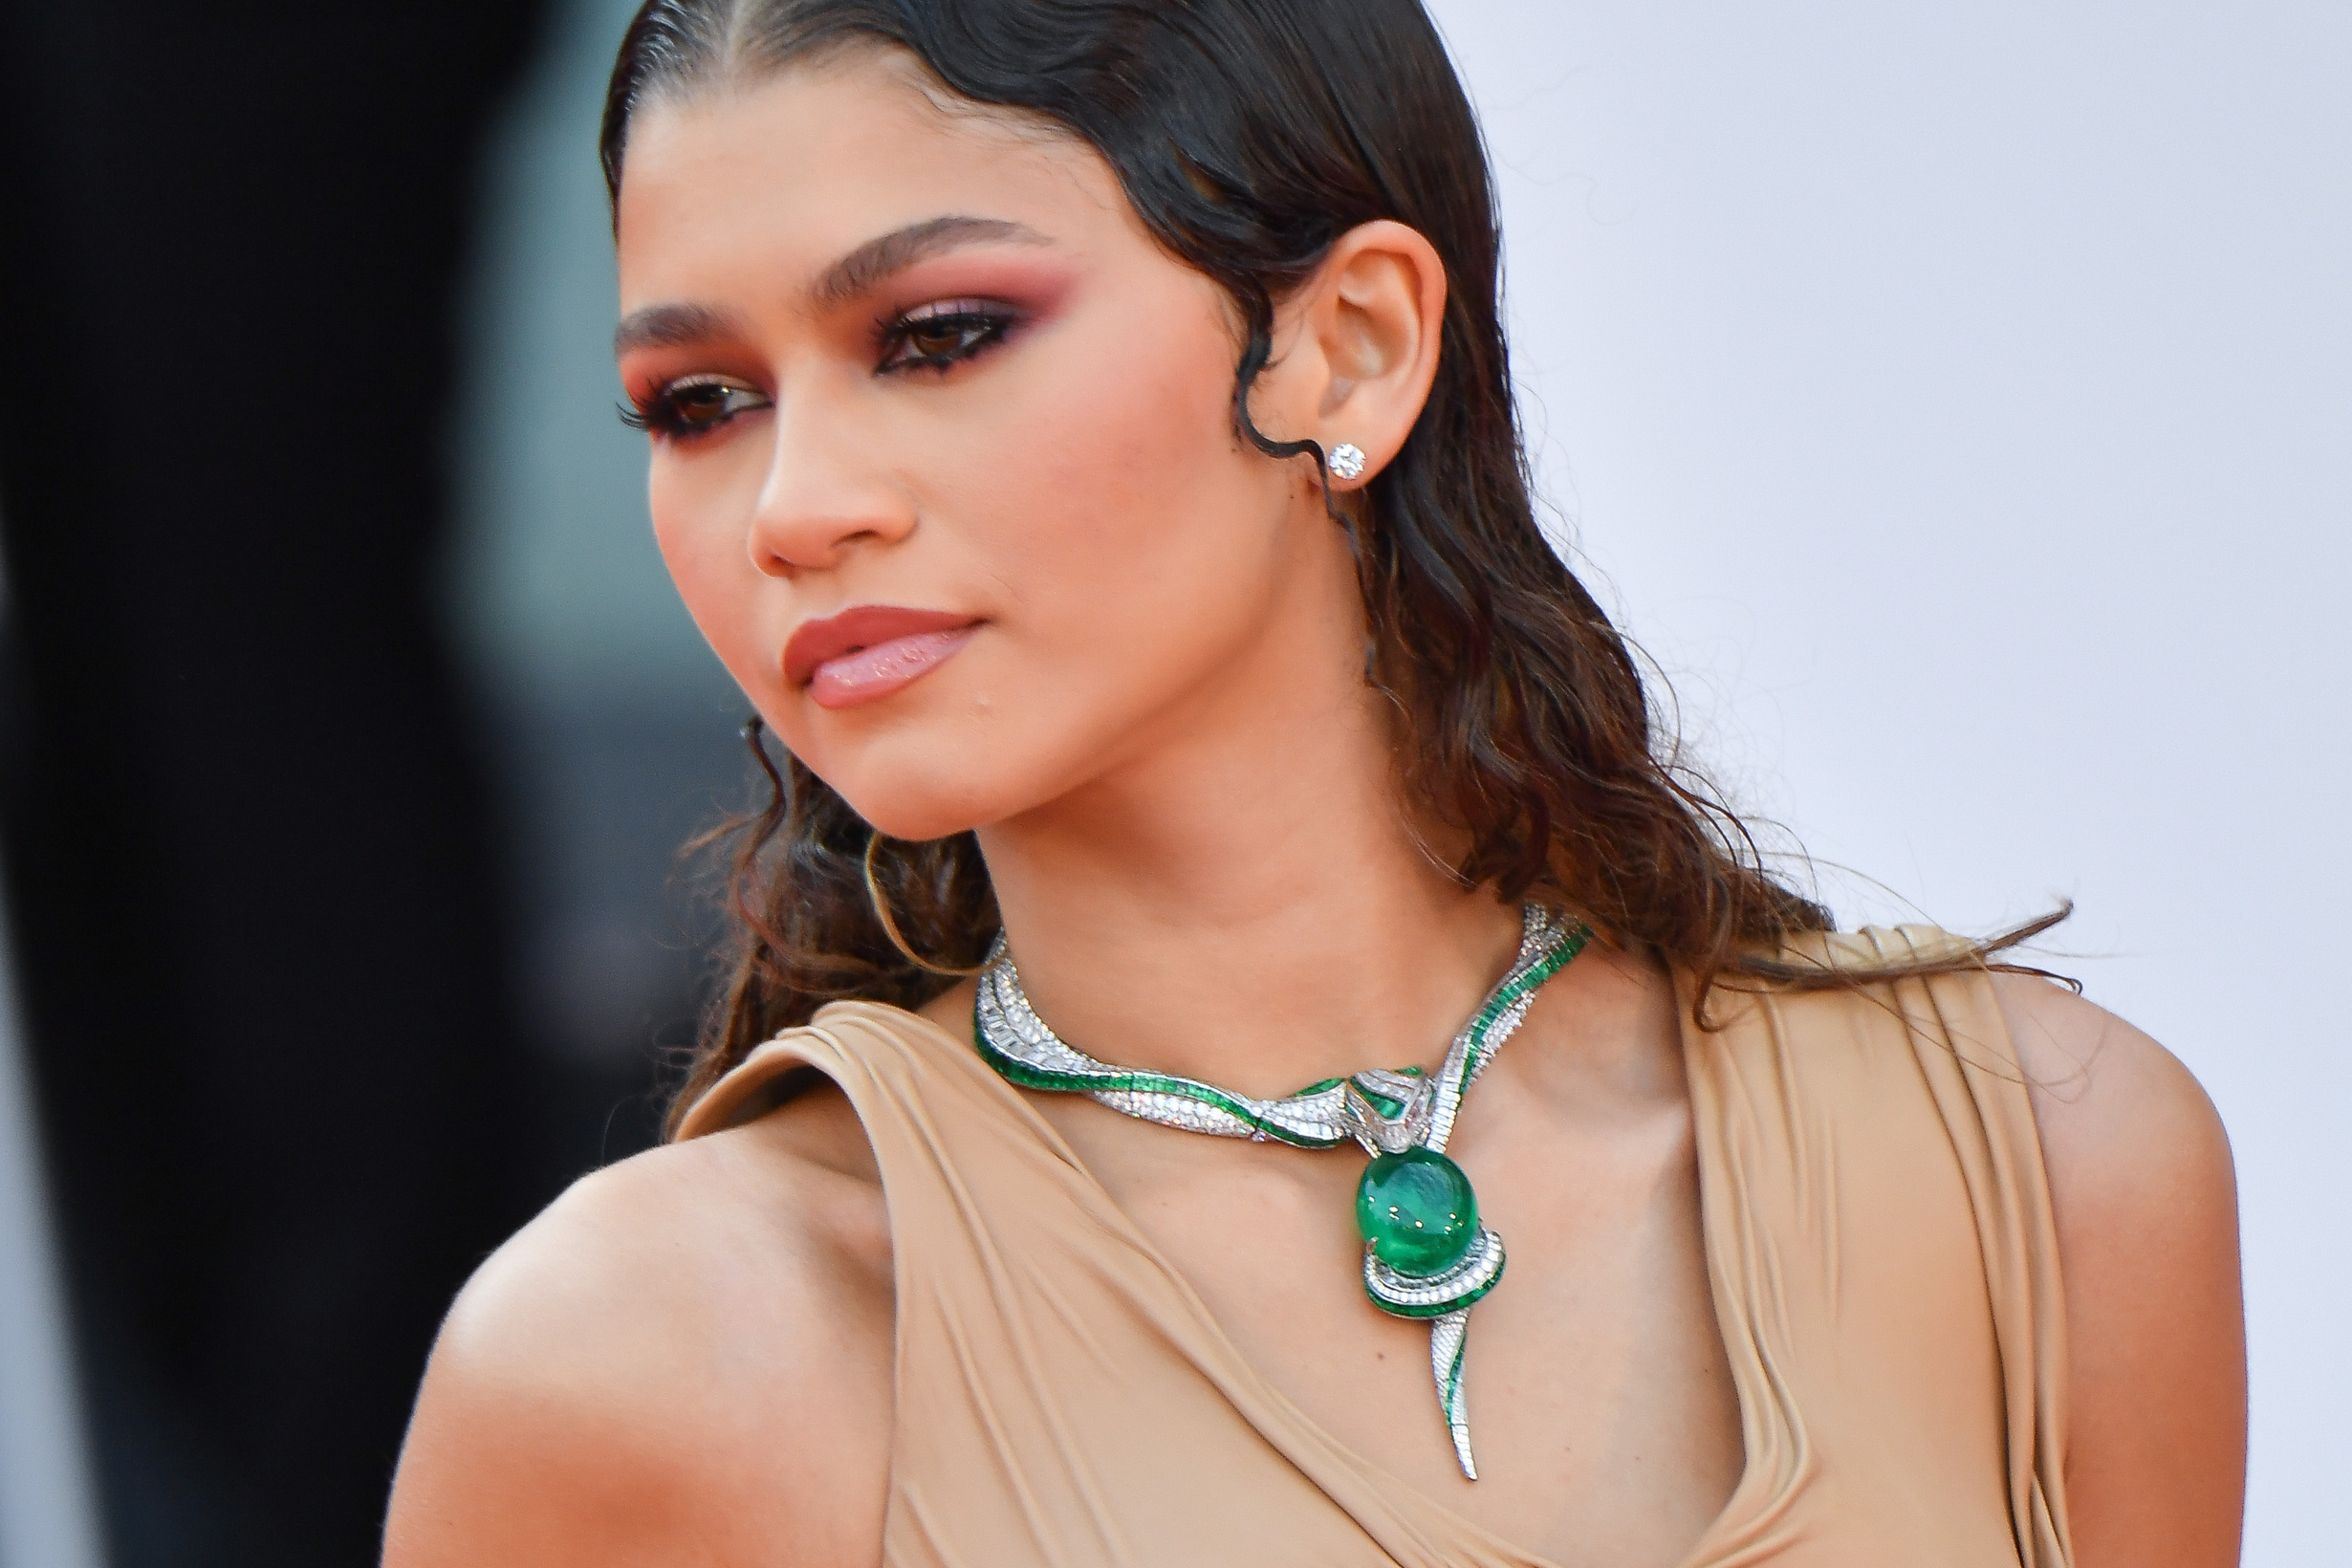  VENICE, ITALY - SEPTEMBER 03: Zendaya attends the red carpet of the movie 